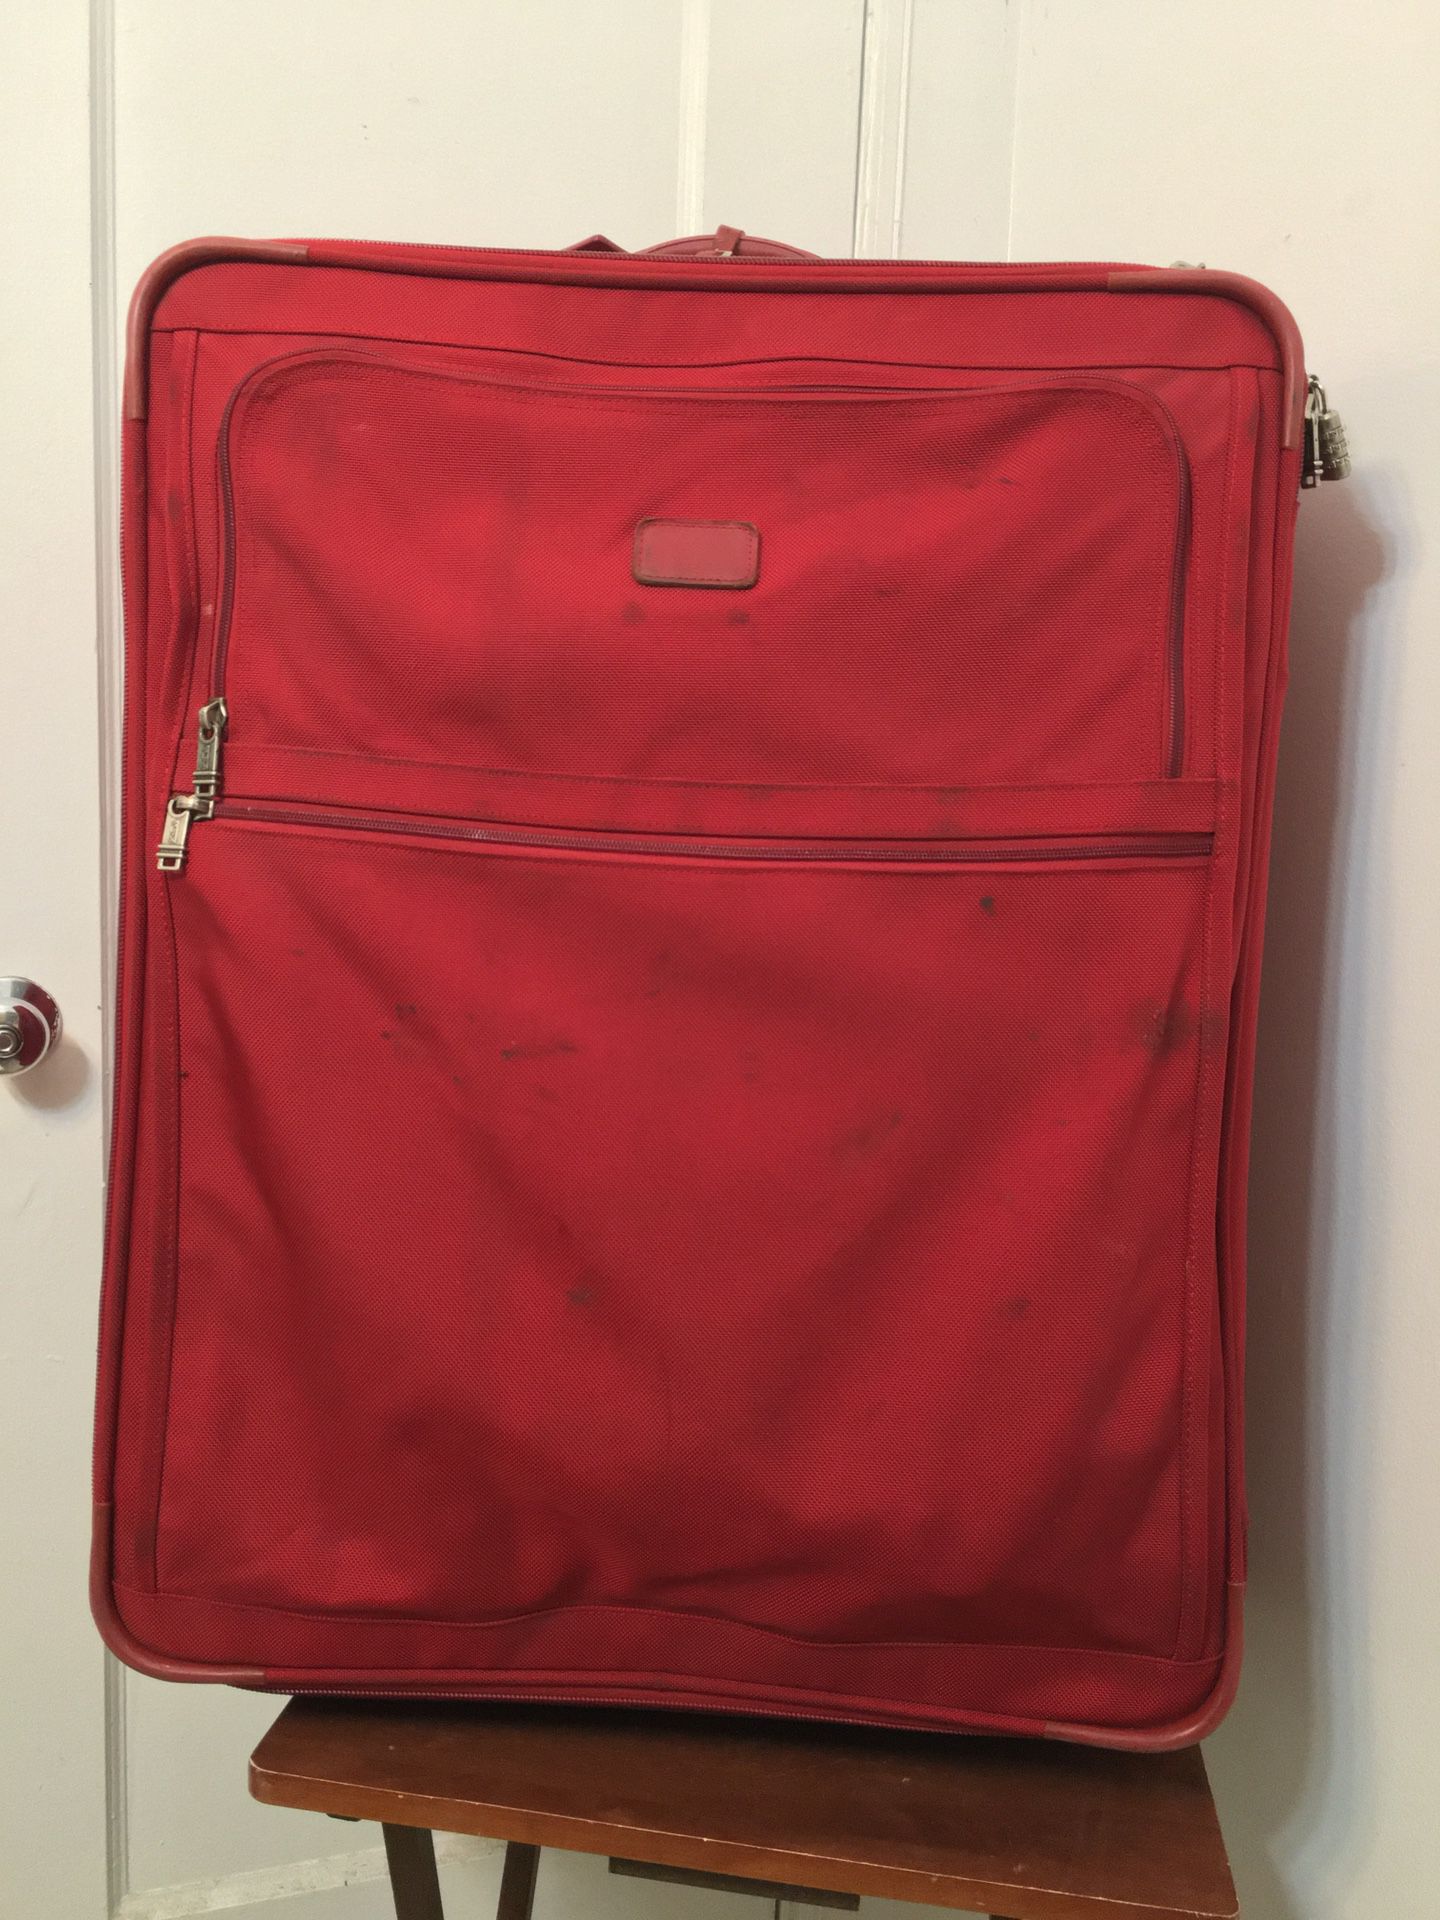 Tumi Luggage And  Garment bag Attached Dimension 12x22x29